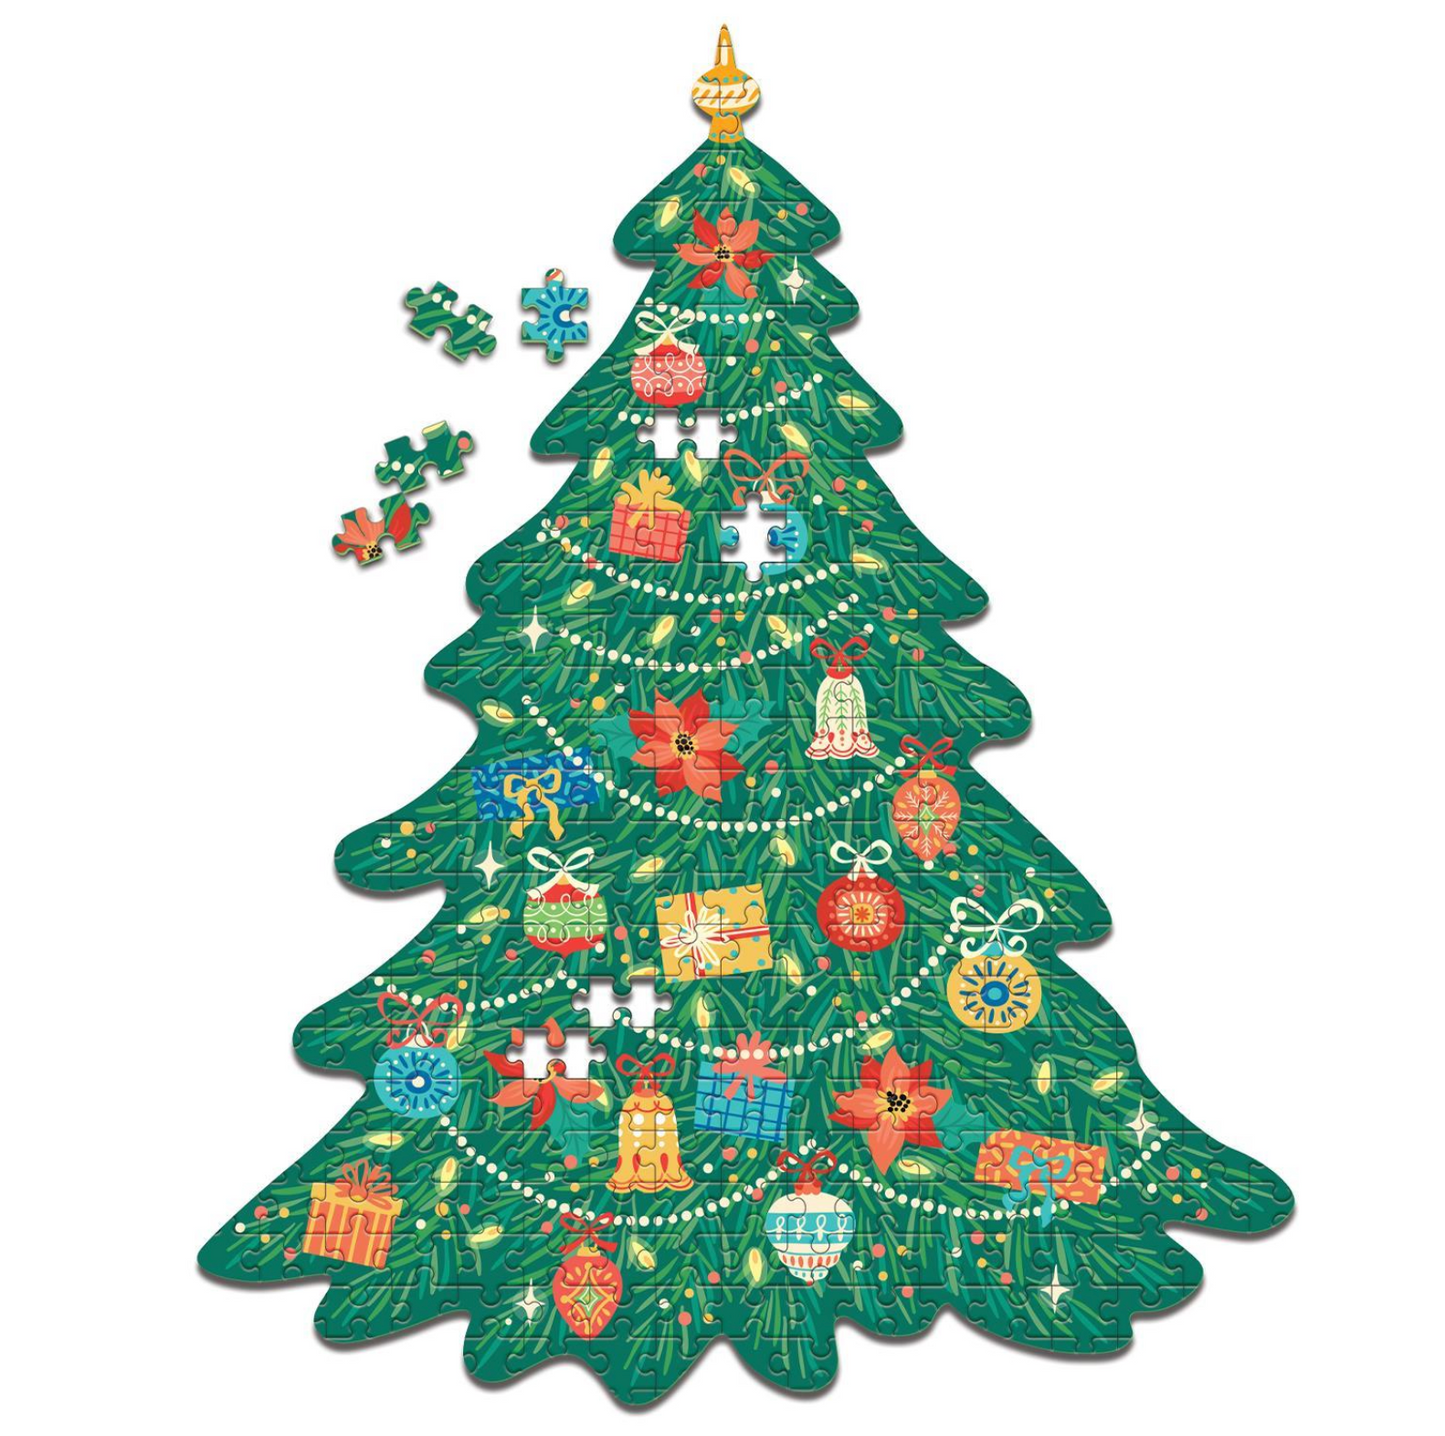 Christmas Tree Puzzle in a Gift Box